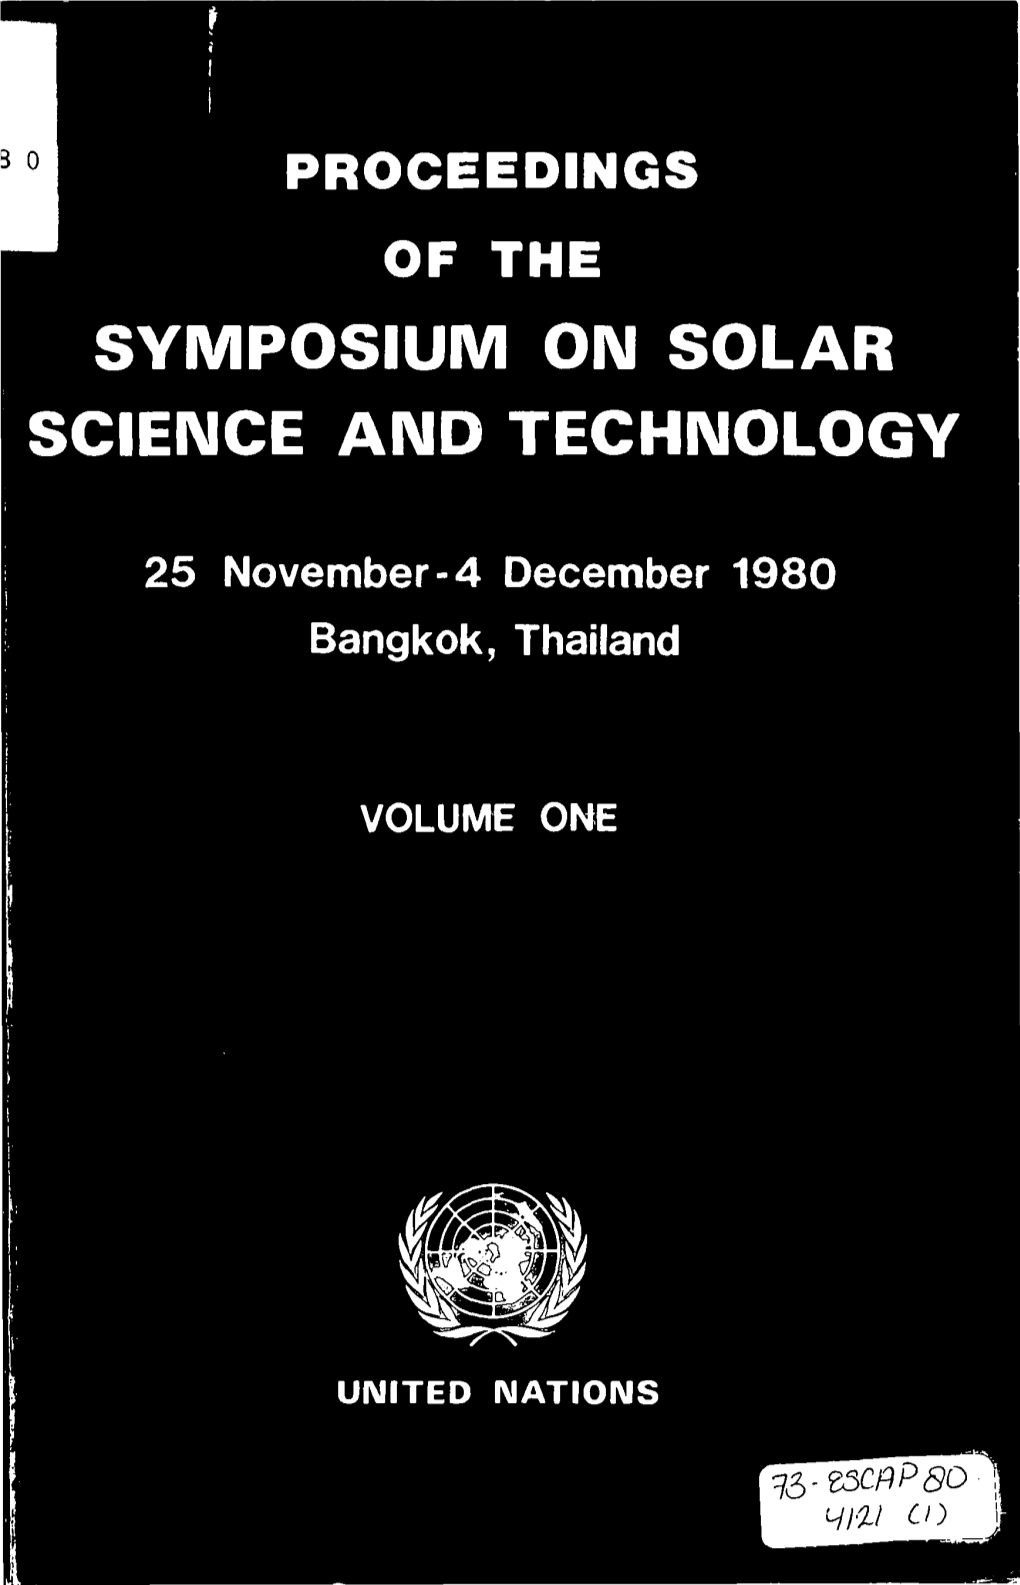 Symposium on Solar Science and Technology